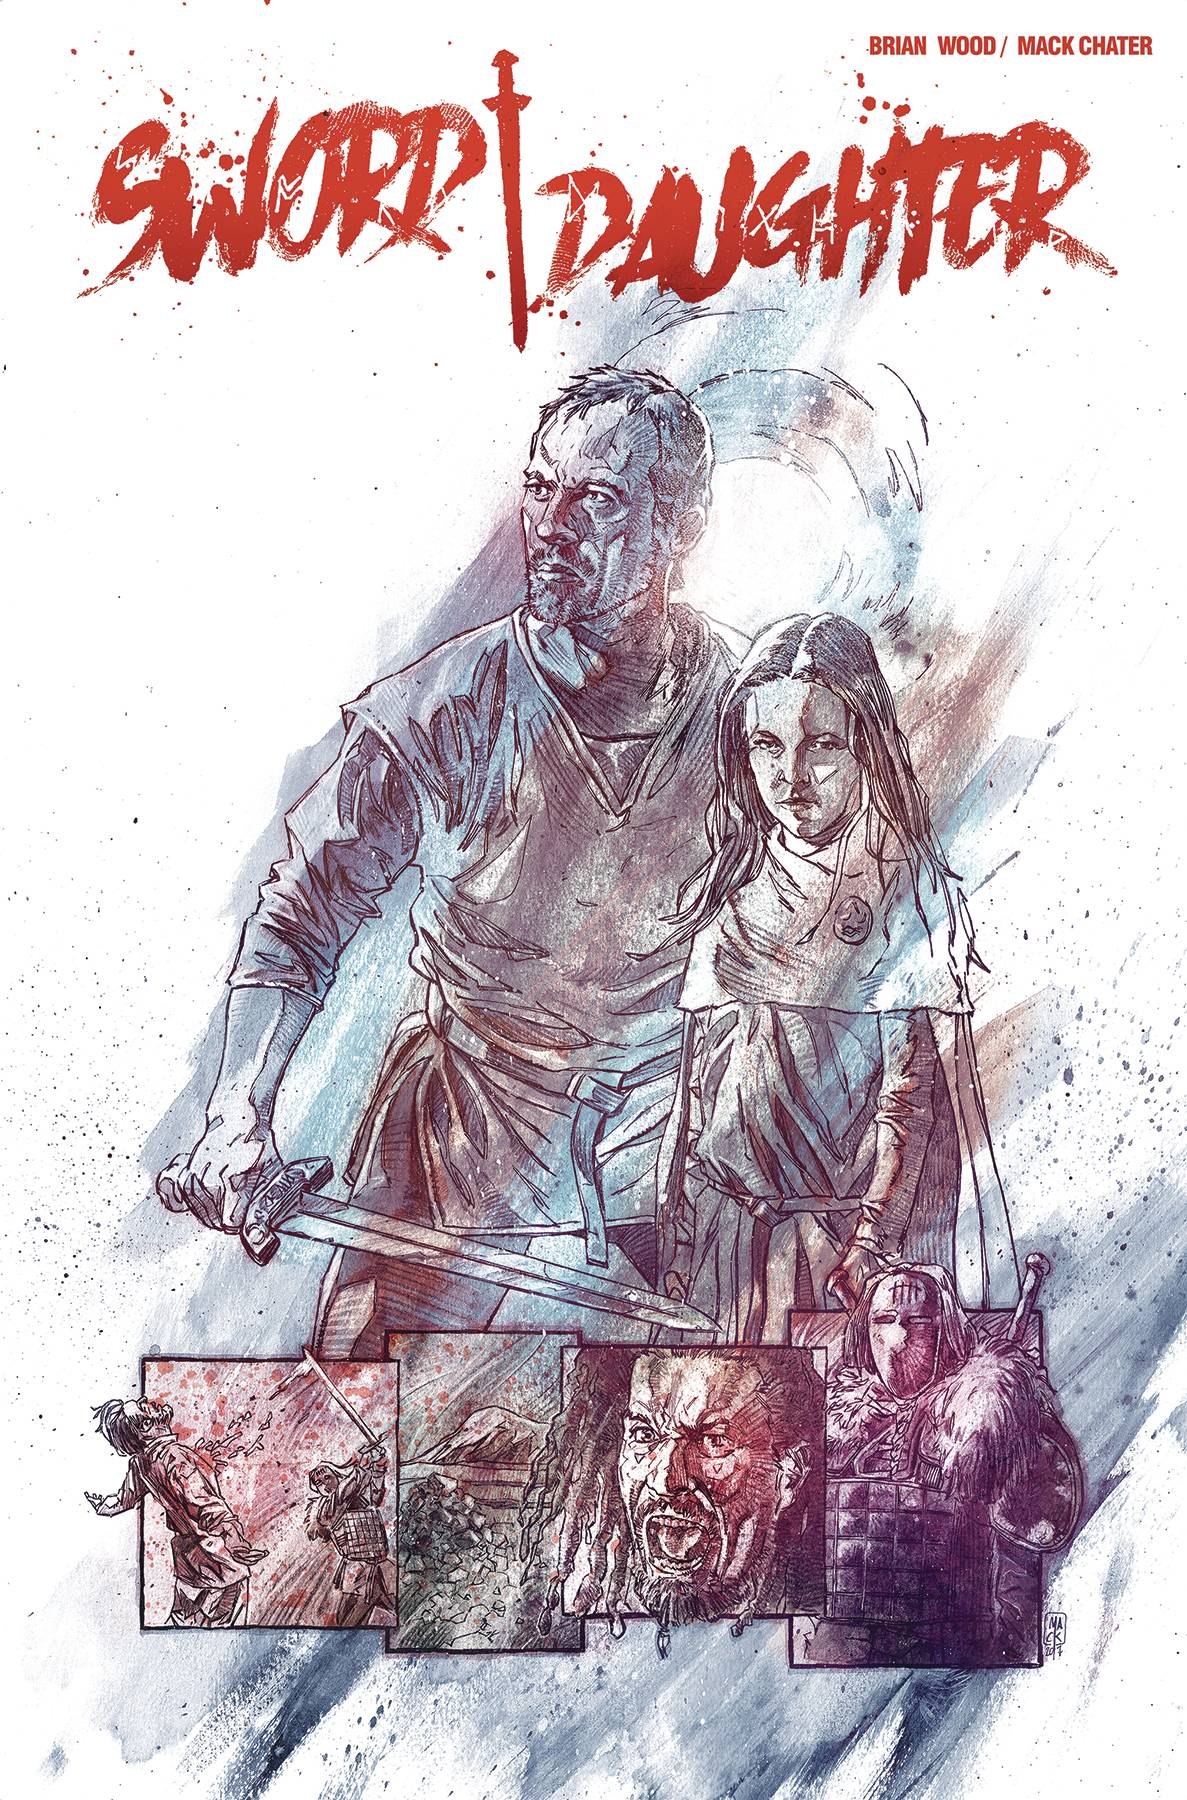 Sword Daughter (2018) #1 Chater "Cover B" Variant